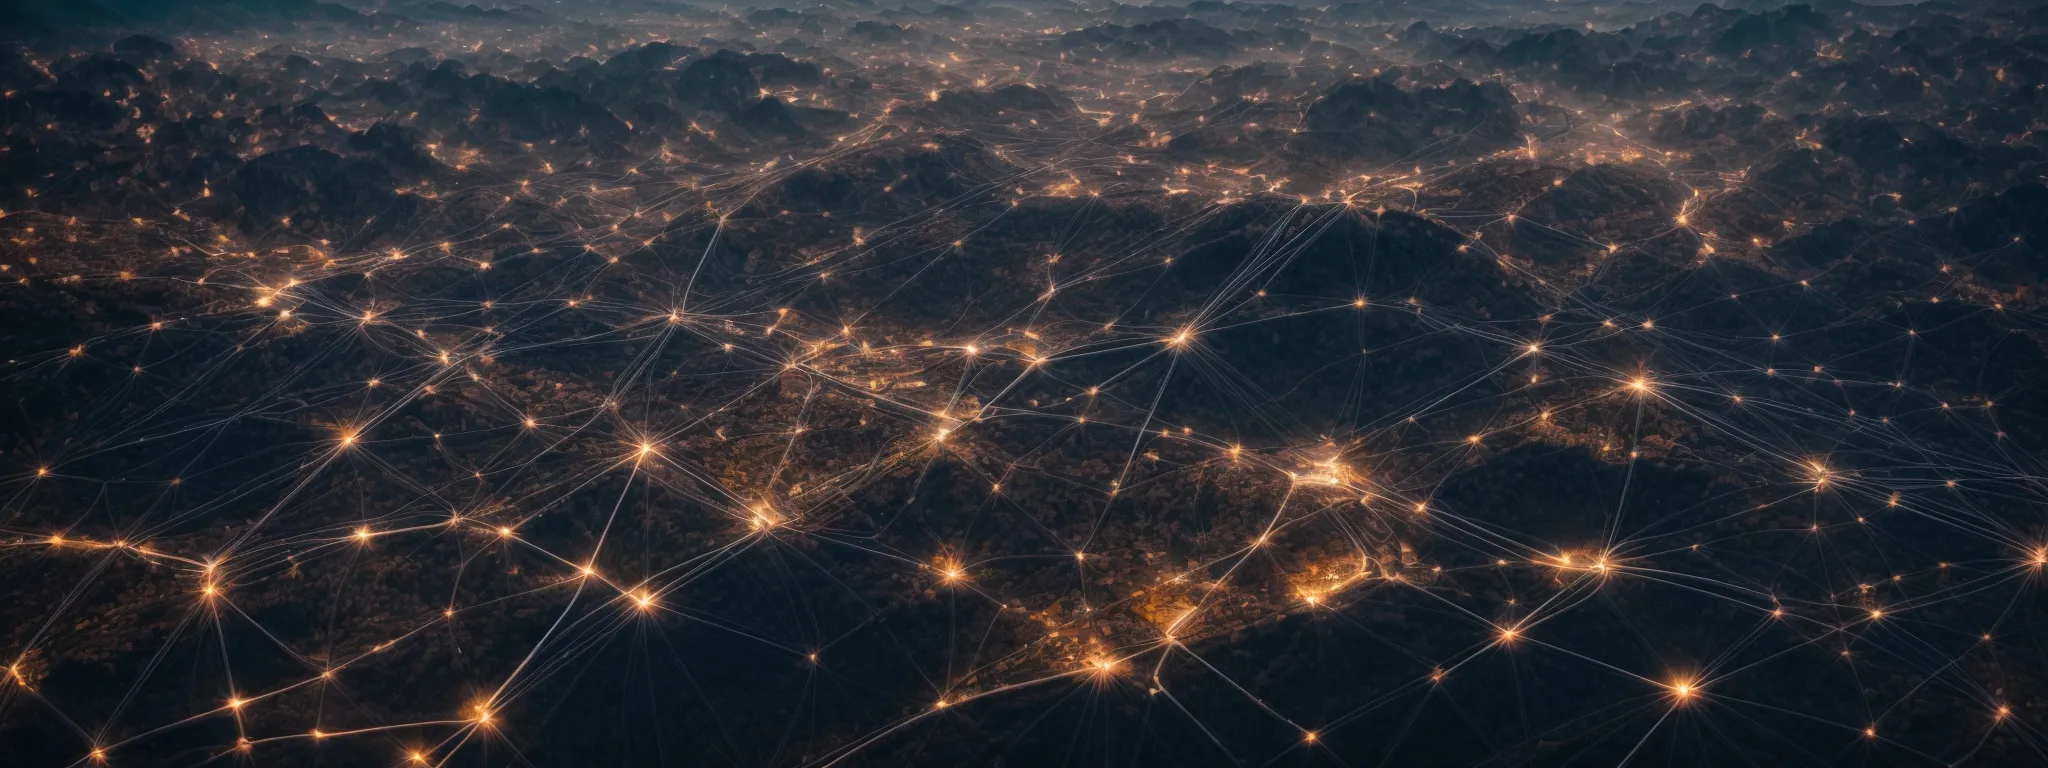 a vast network of interconnected nodes spreading across a digital landscape, symbolizing complex global seo strategies.